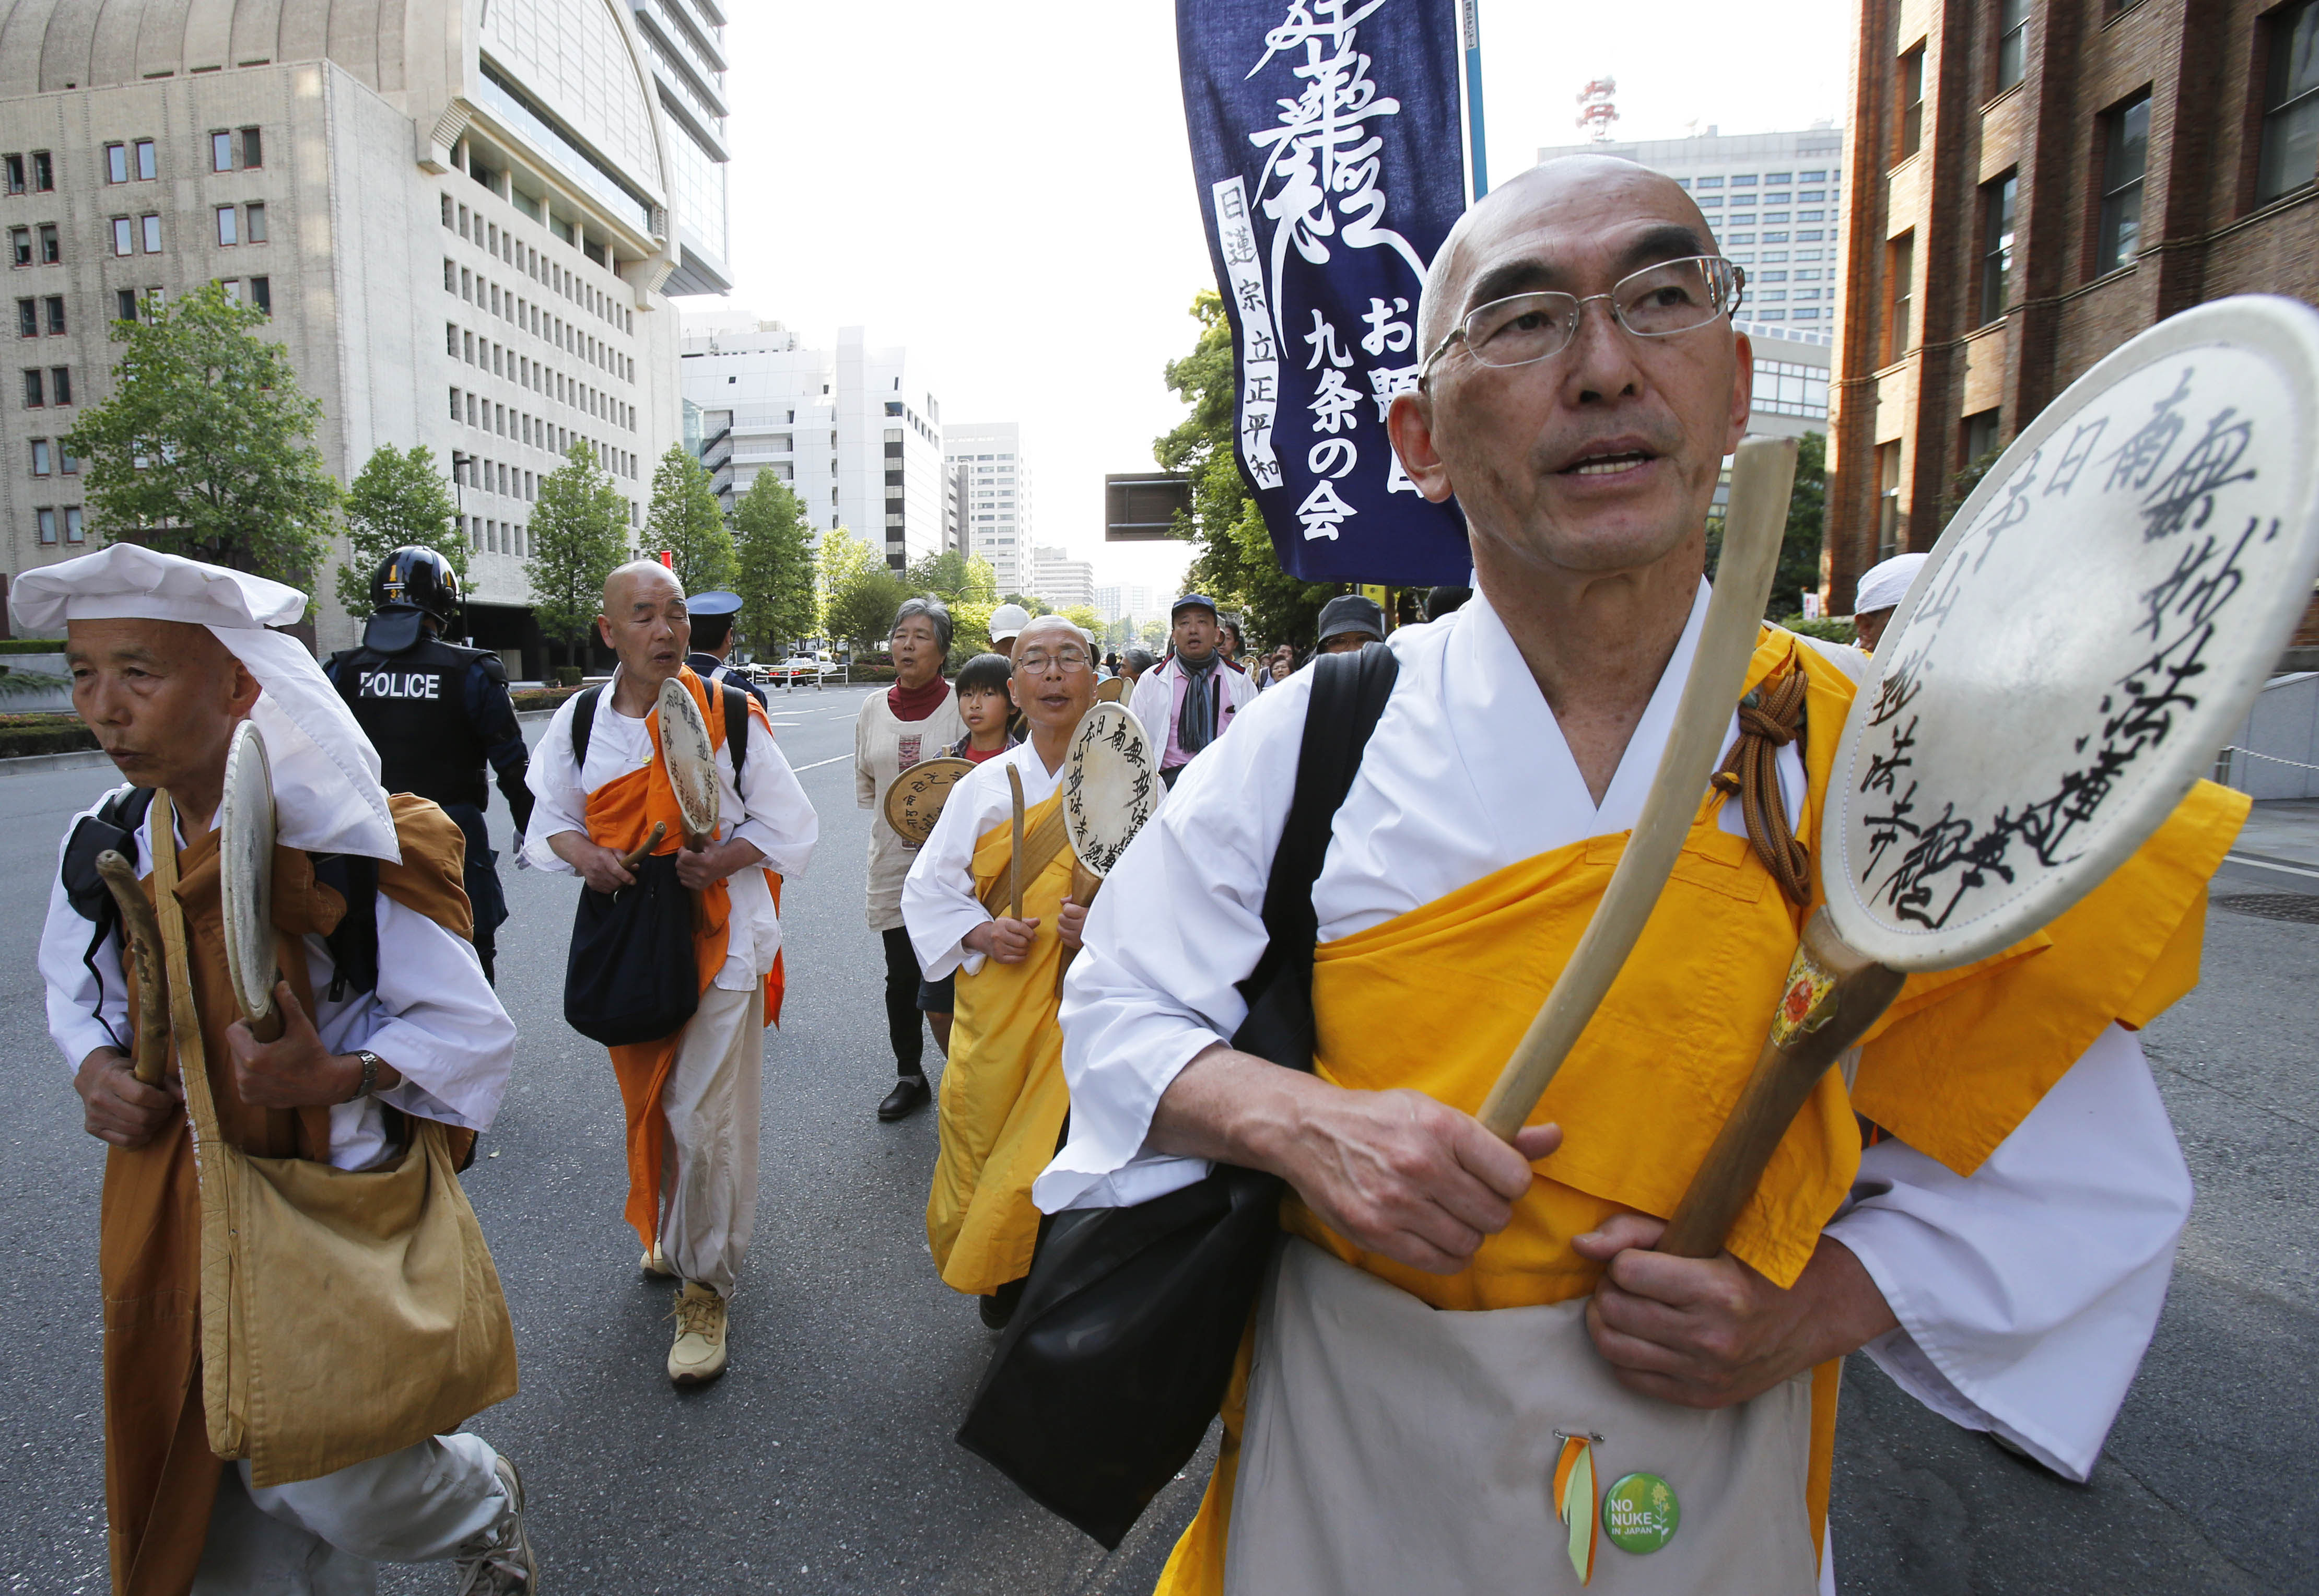 Off the warpath: Buddhist monks participate in a march against Prime Minister Shinzo Abe's calls to amend the war-renouncing Constitution in Tokyo on the Constitution Day holiday Friday. Hundreds of people, young and old, gathered downtown for a peaceful protest against Abe's efforts to give the government more power to abridge civil liberties. | AP